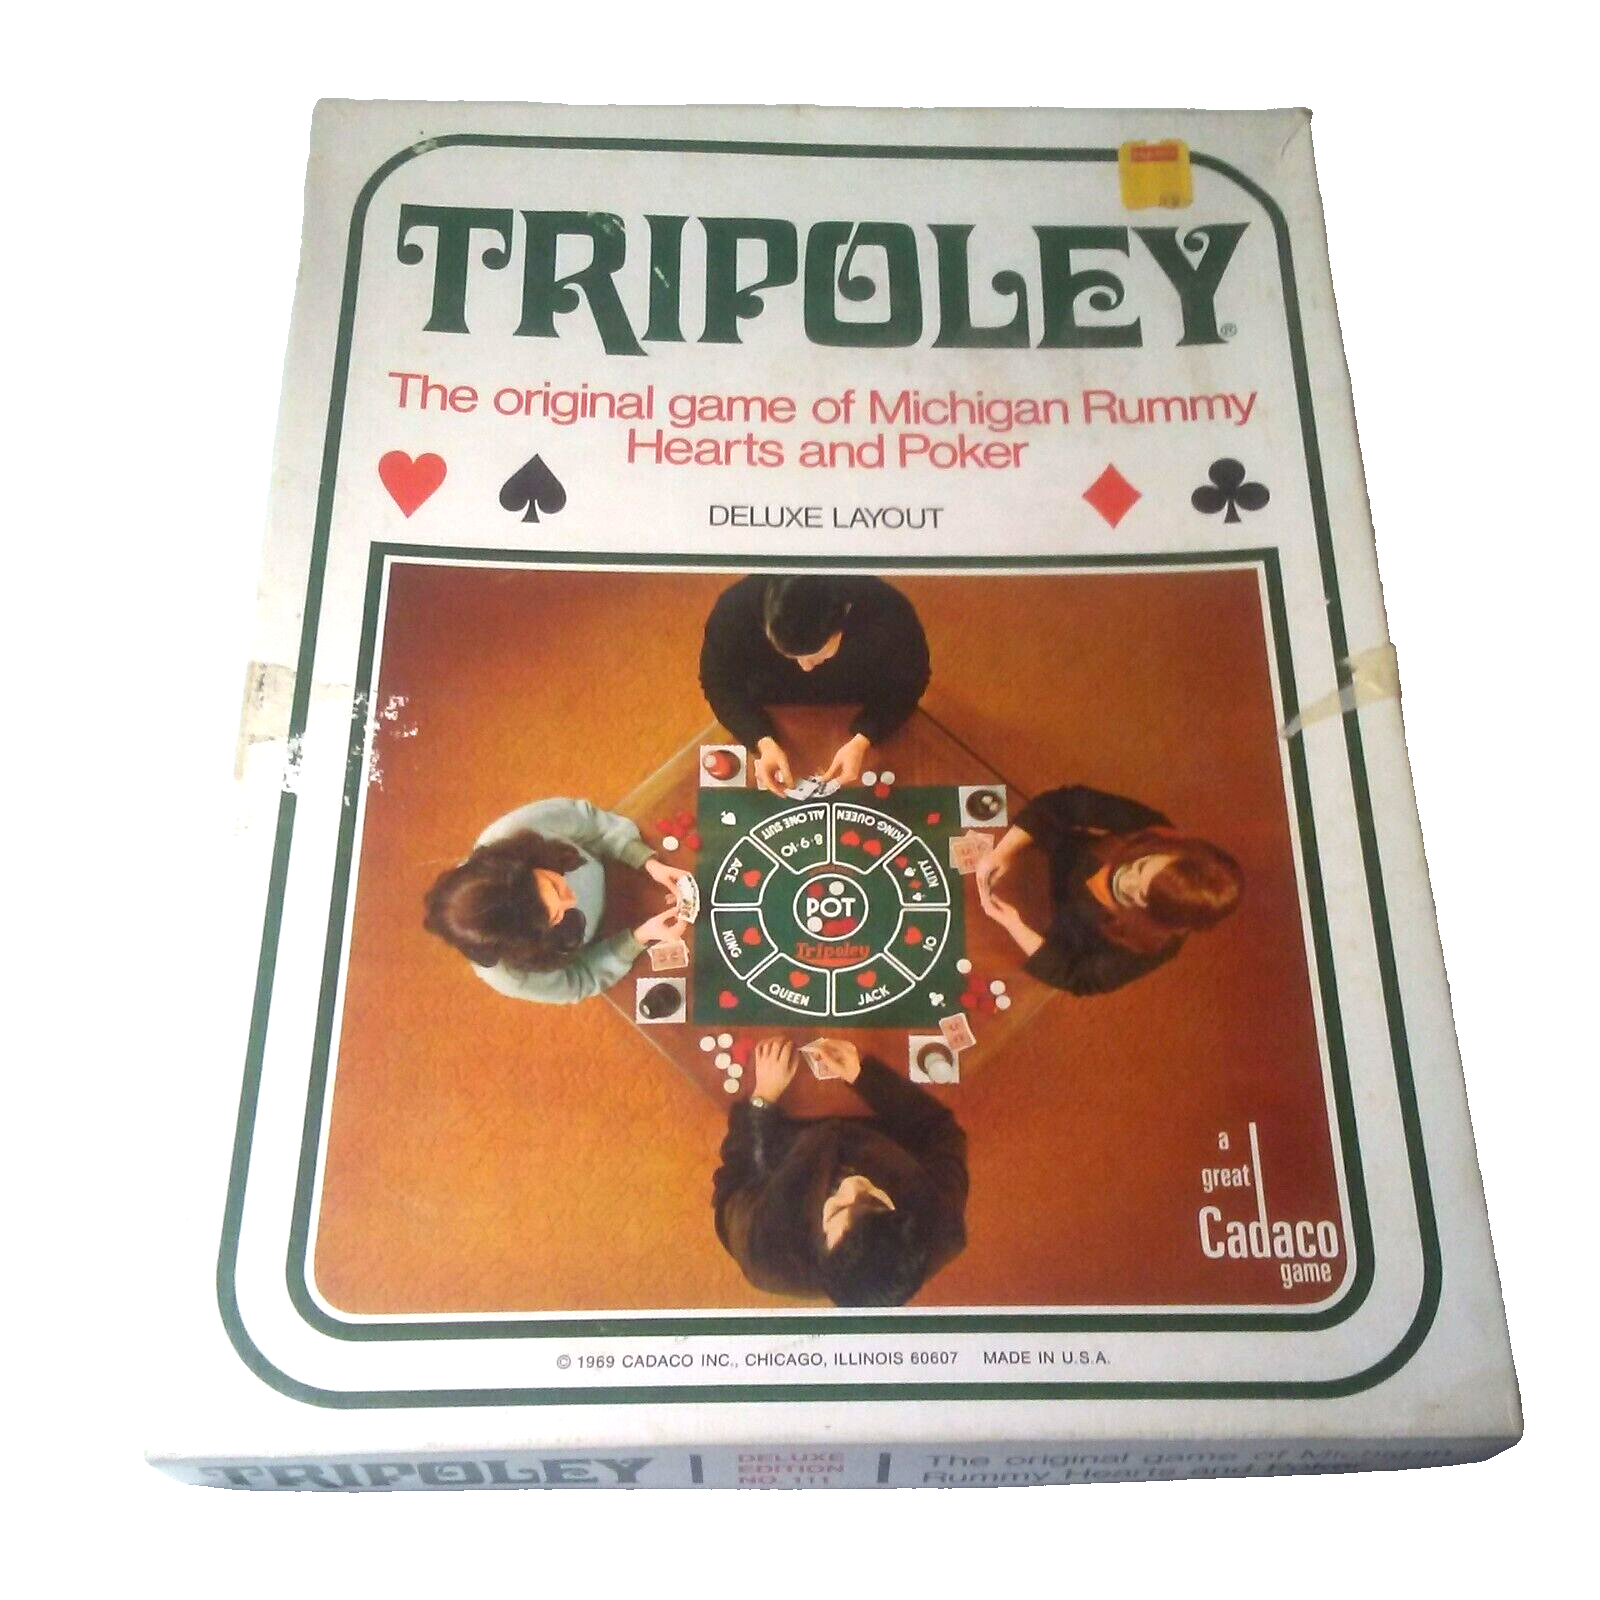 Vintage 1969 Cadaco TRIPOLEY Deluxe Edition 111 Playing Mat Only (in box) - $12.86